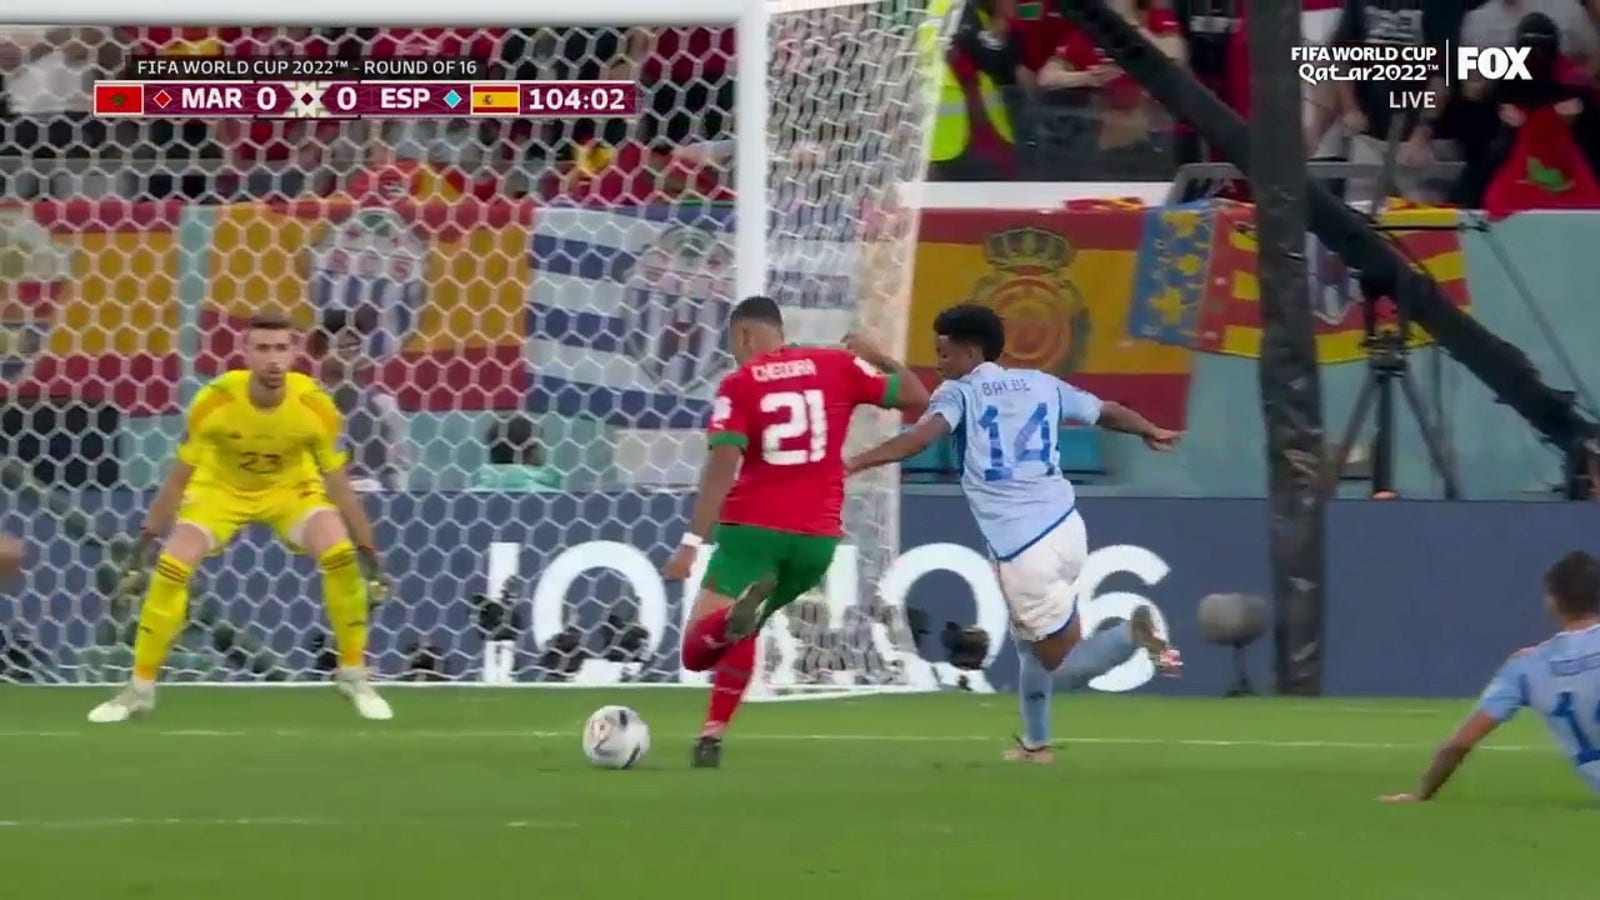 Walid Cheddira's shot for Morocco is saved by Spain goalkeeper Unai Simon